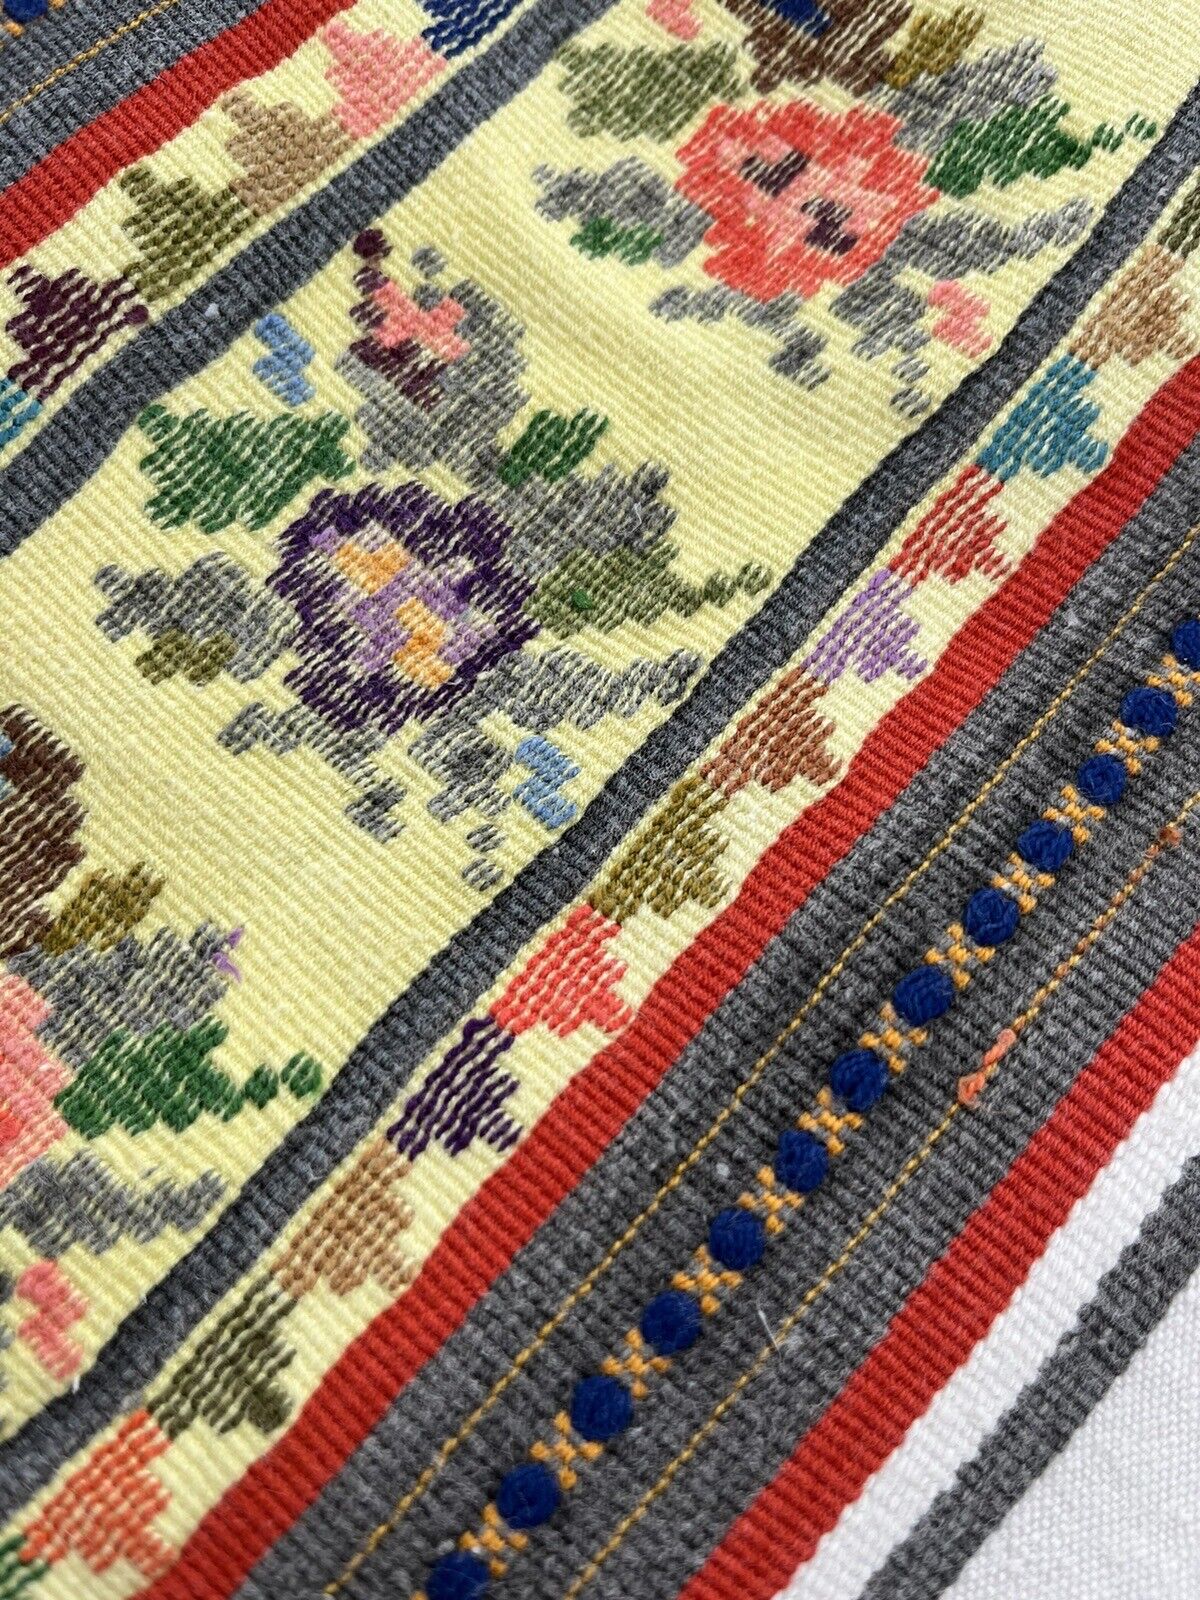 Vintage Hungarian/woven linen runner- colorful floral embroidery borders-pretty